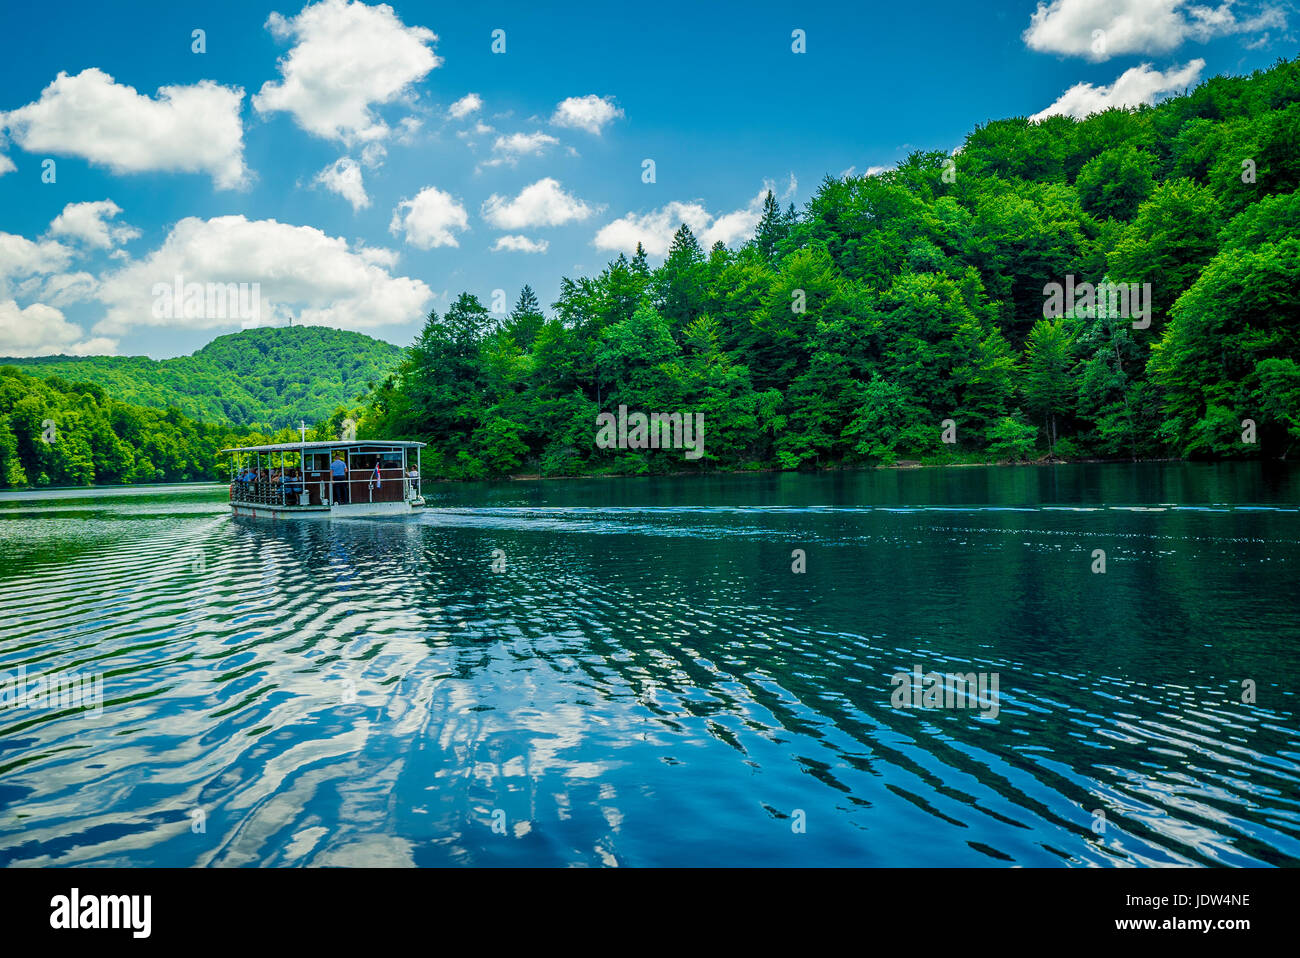 The largest lake at Plitvice Lakes National Park connects the upper and lower lakes. Tourists take a boat to transfer between. Stock Photo